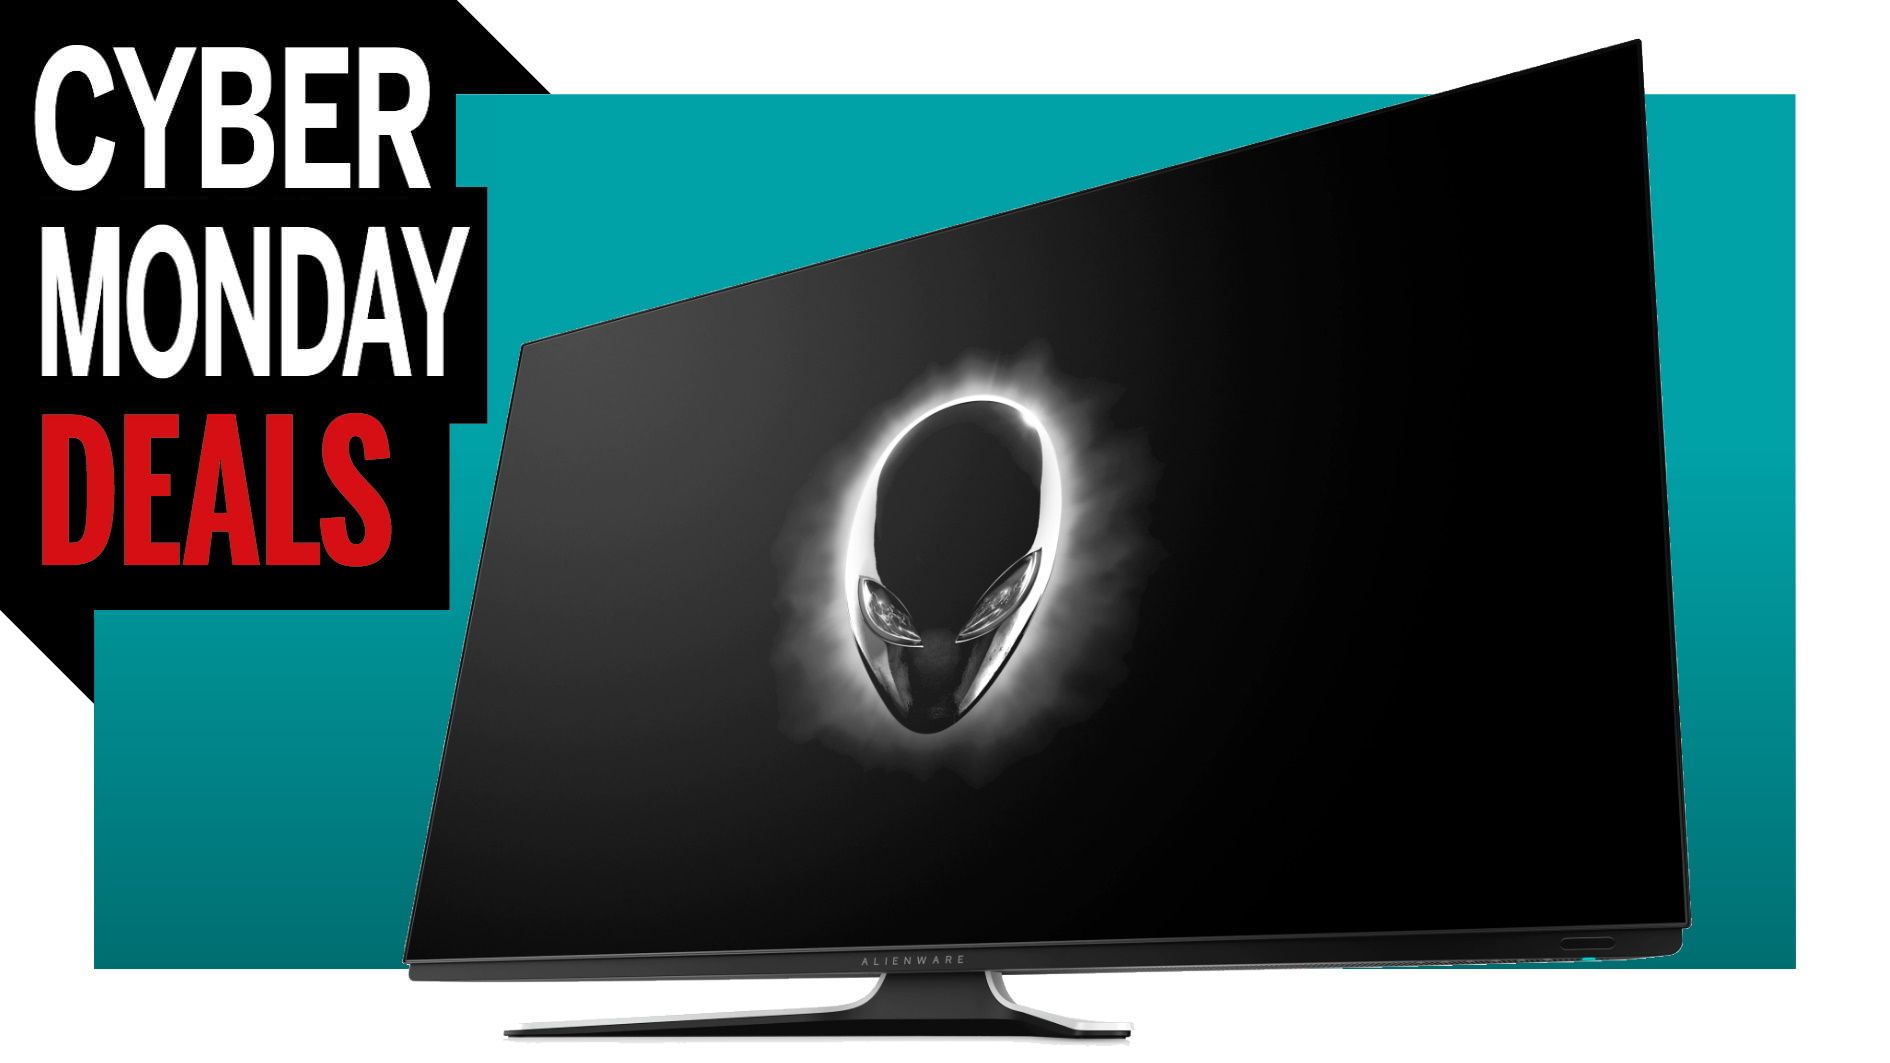  This gorgeously massive 55-inch 4K Alienware OLED monitor is back on sale for Cyber Monday 